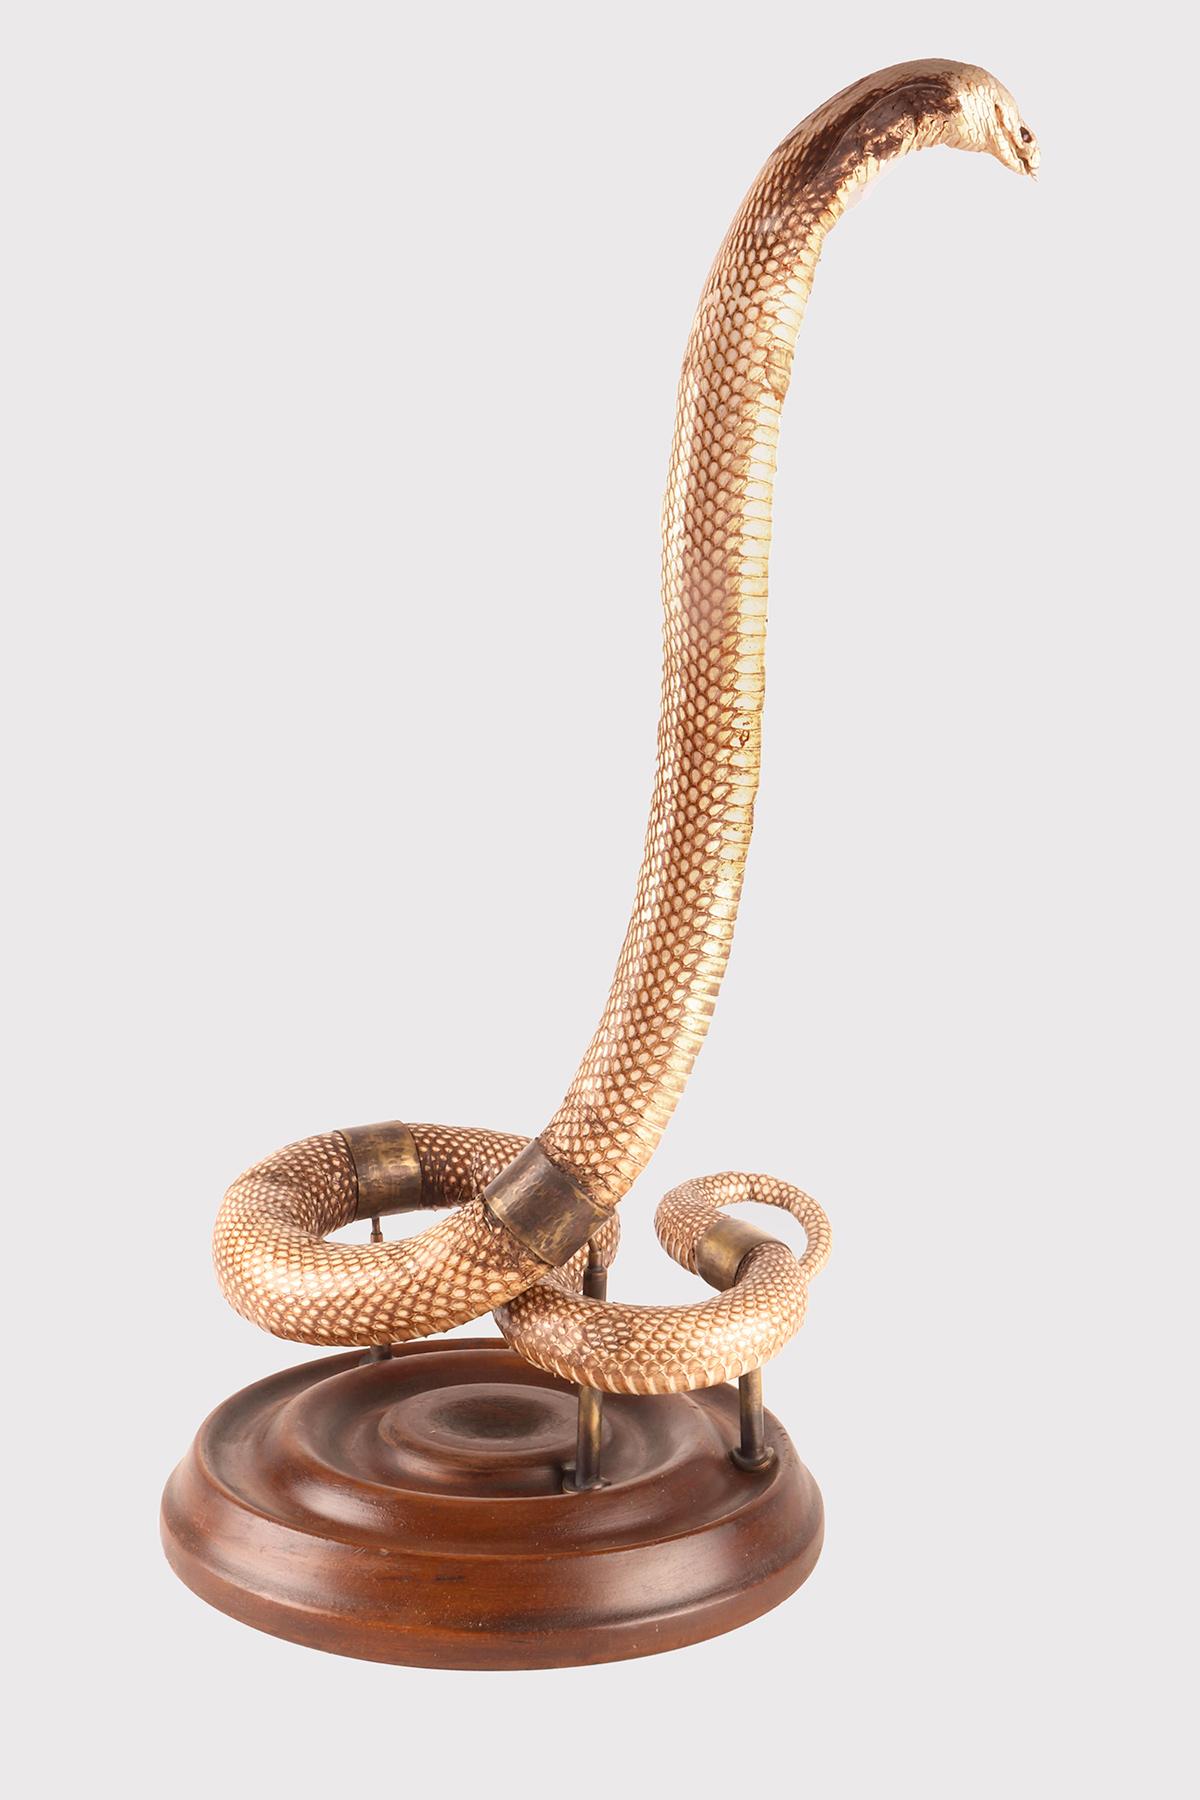 A taxidermy specimen of the Hemachatus hemachatus (Bonnaterre 1790) snake, a genus of snake in the Elapidae family, commonly known as the cobra. Speimen from Natural History laboratory in attack attitude. The specimen is fixed to a round hammerwood